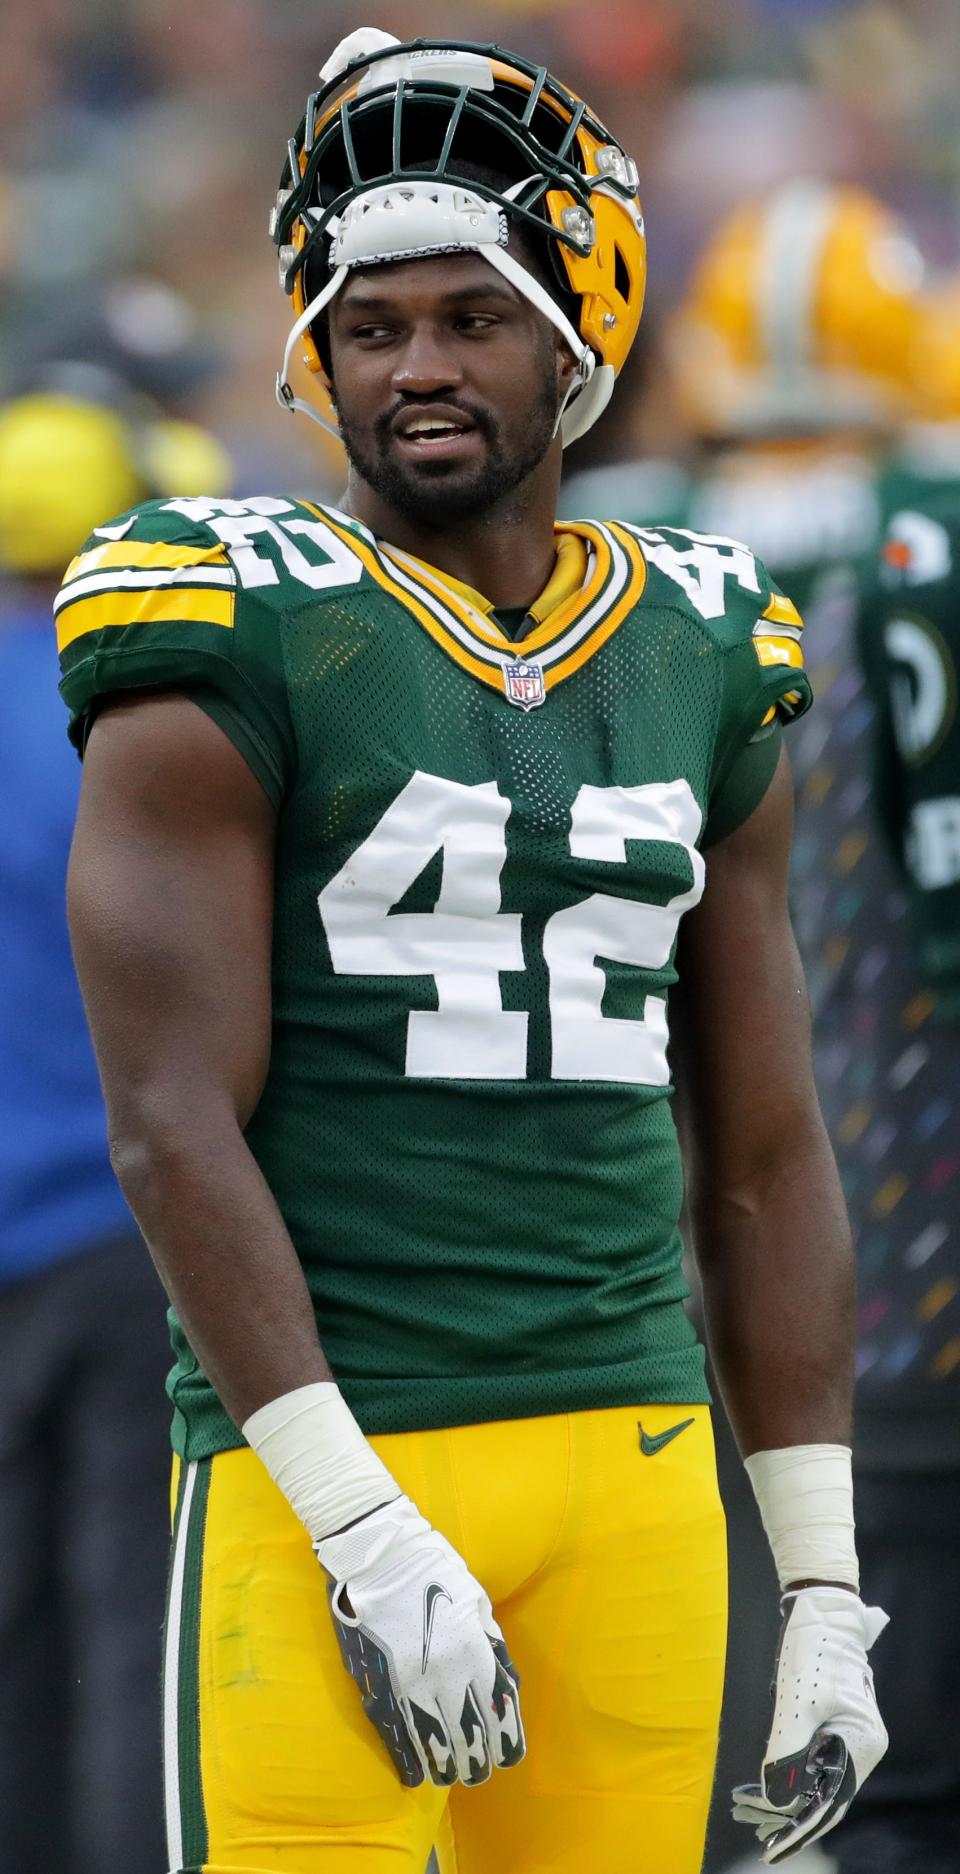 Oren Burks was a special teams leader with the Packers but signed with San Francisco this offseason.